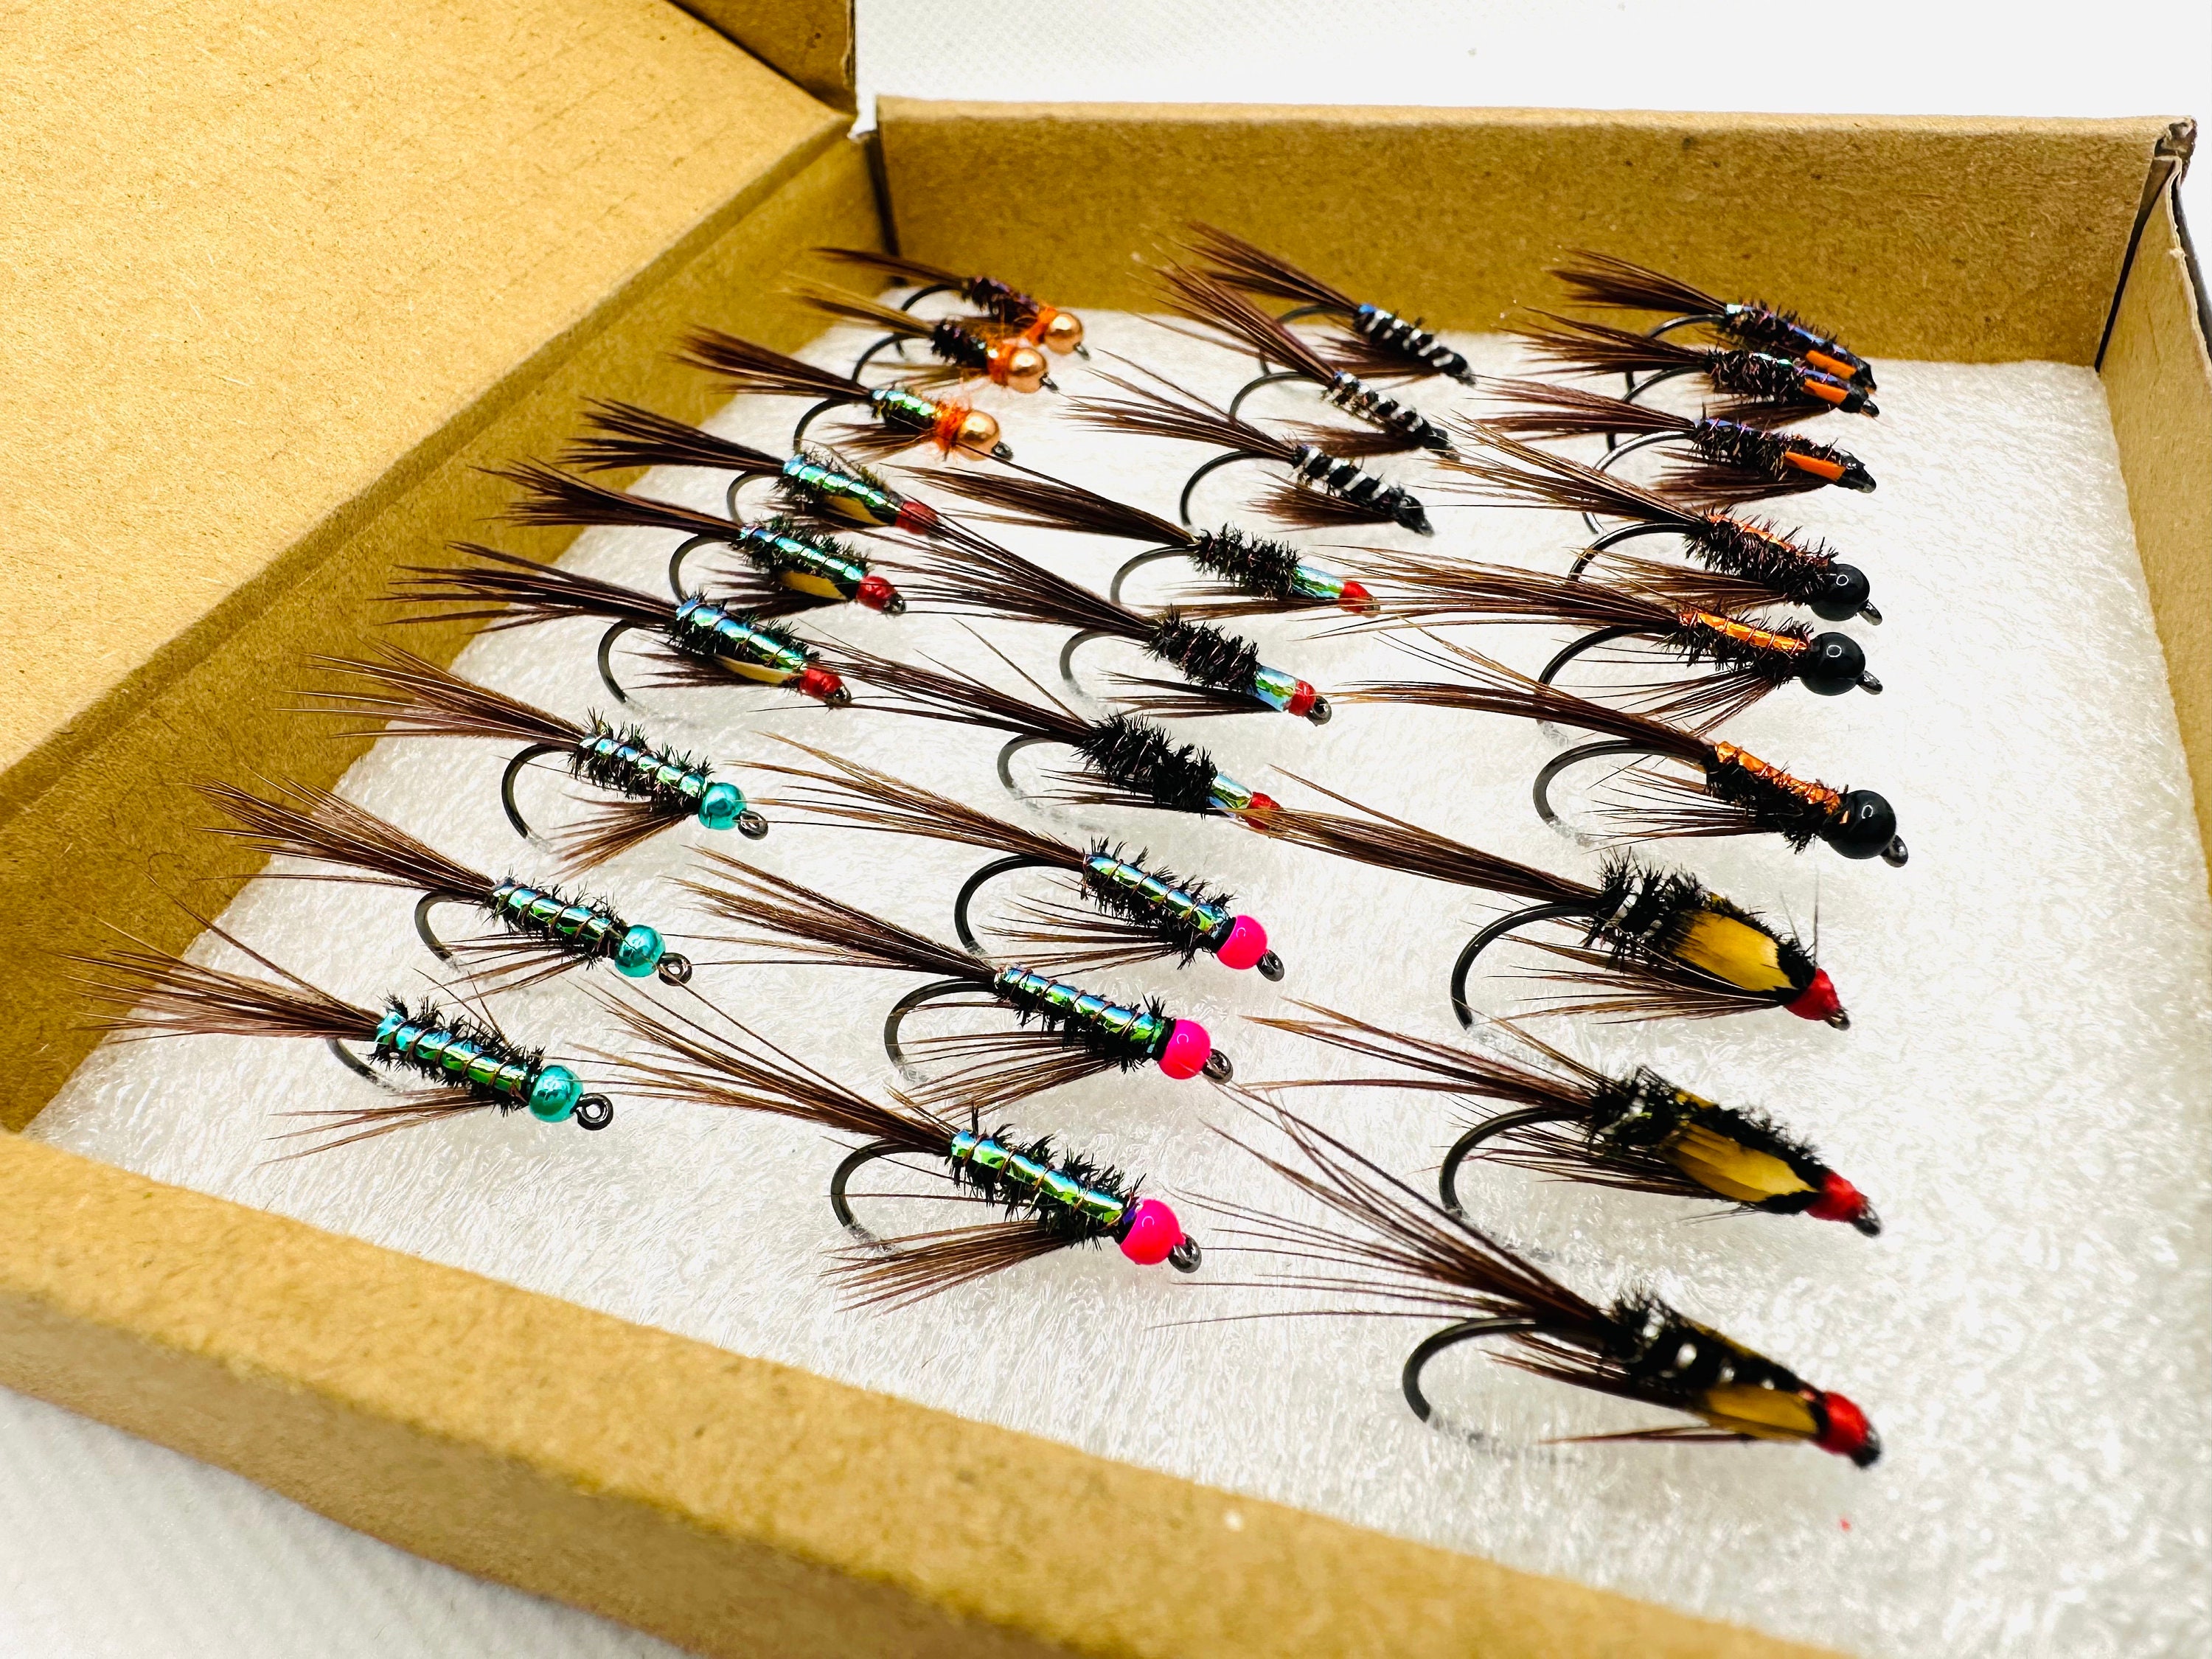 Fly fishing - Nymph Box Limited Edition - 27 Flies, 9 pattens, 3 of each.